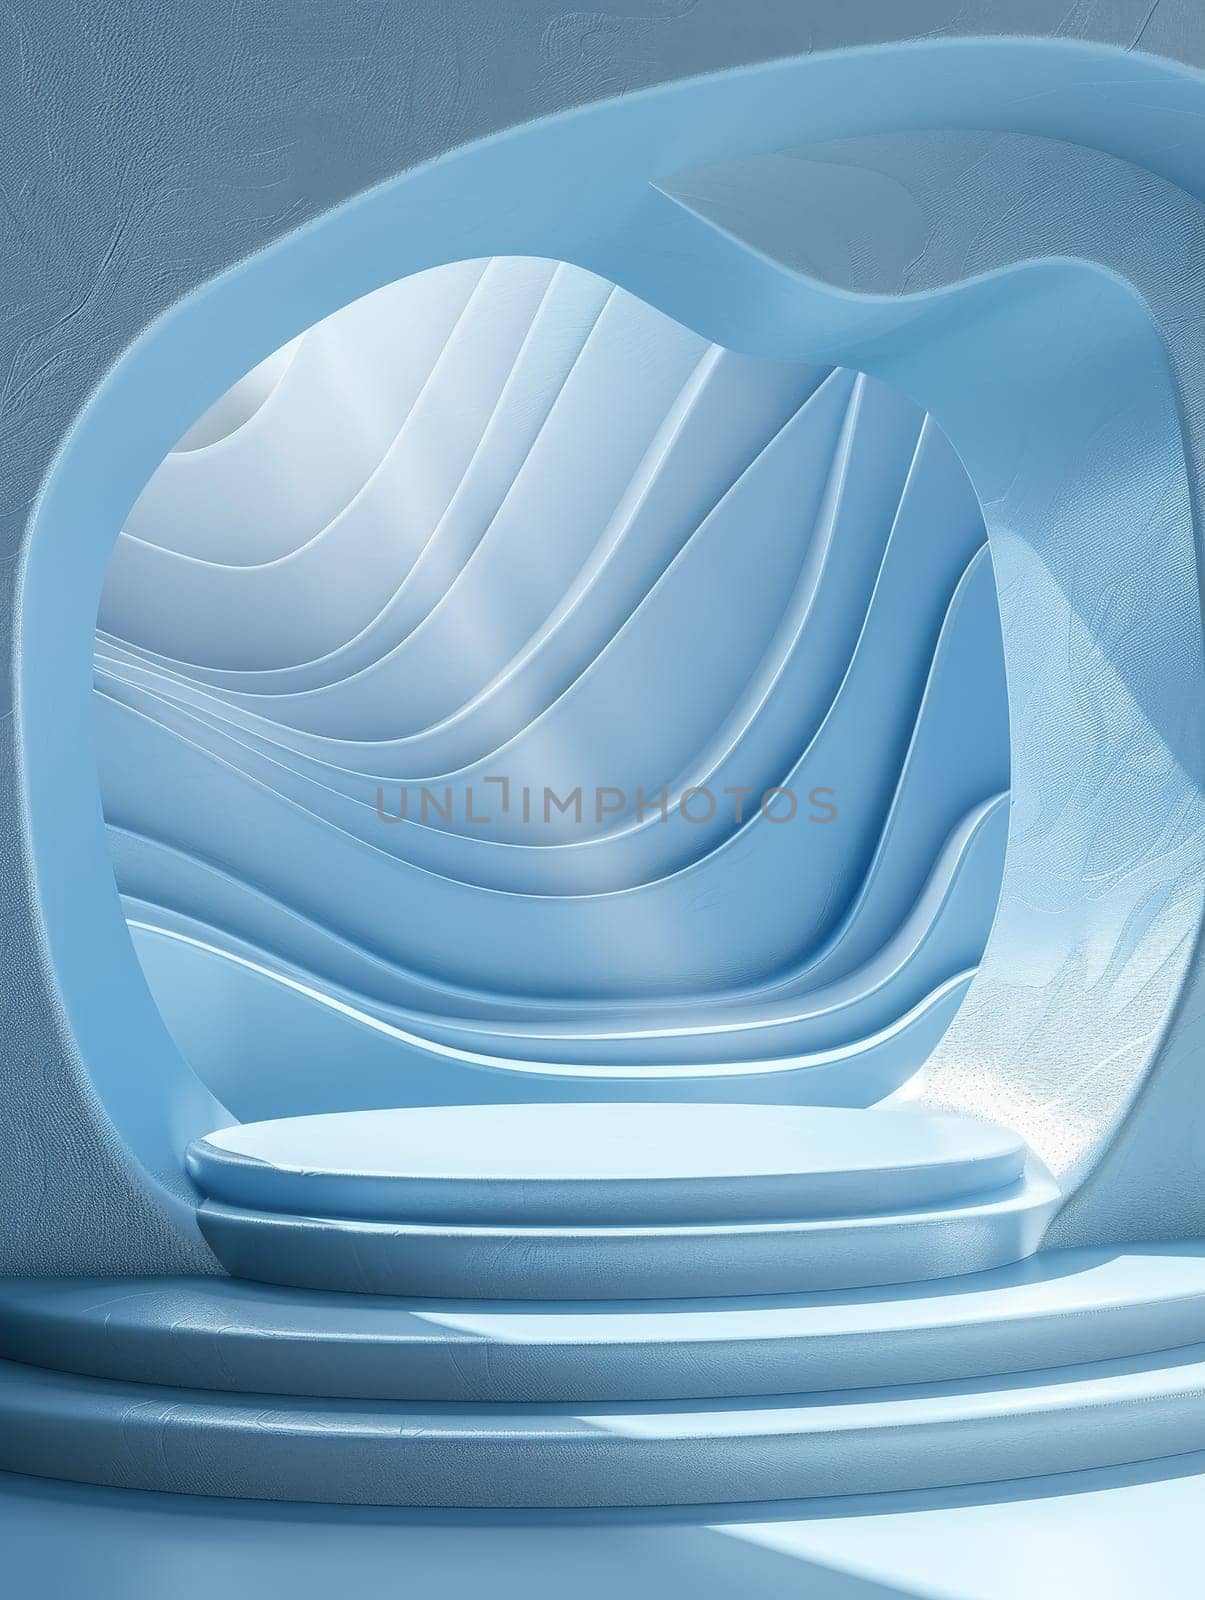 Podium and sculpture of a wave background. showcase and product concept.